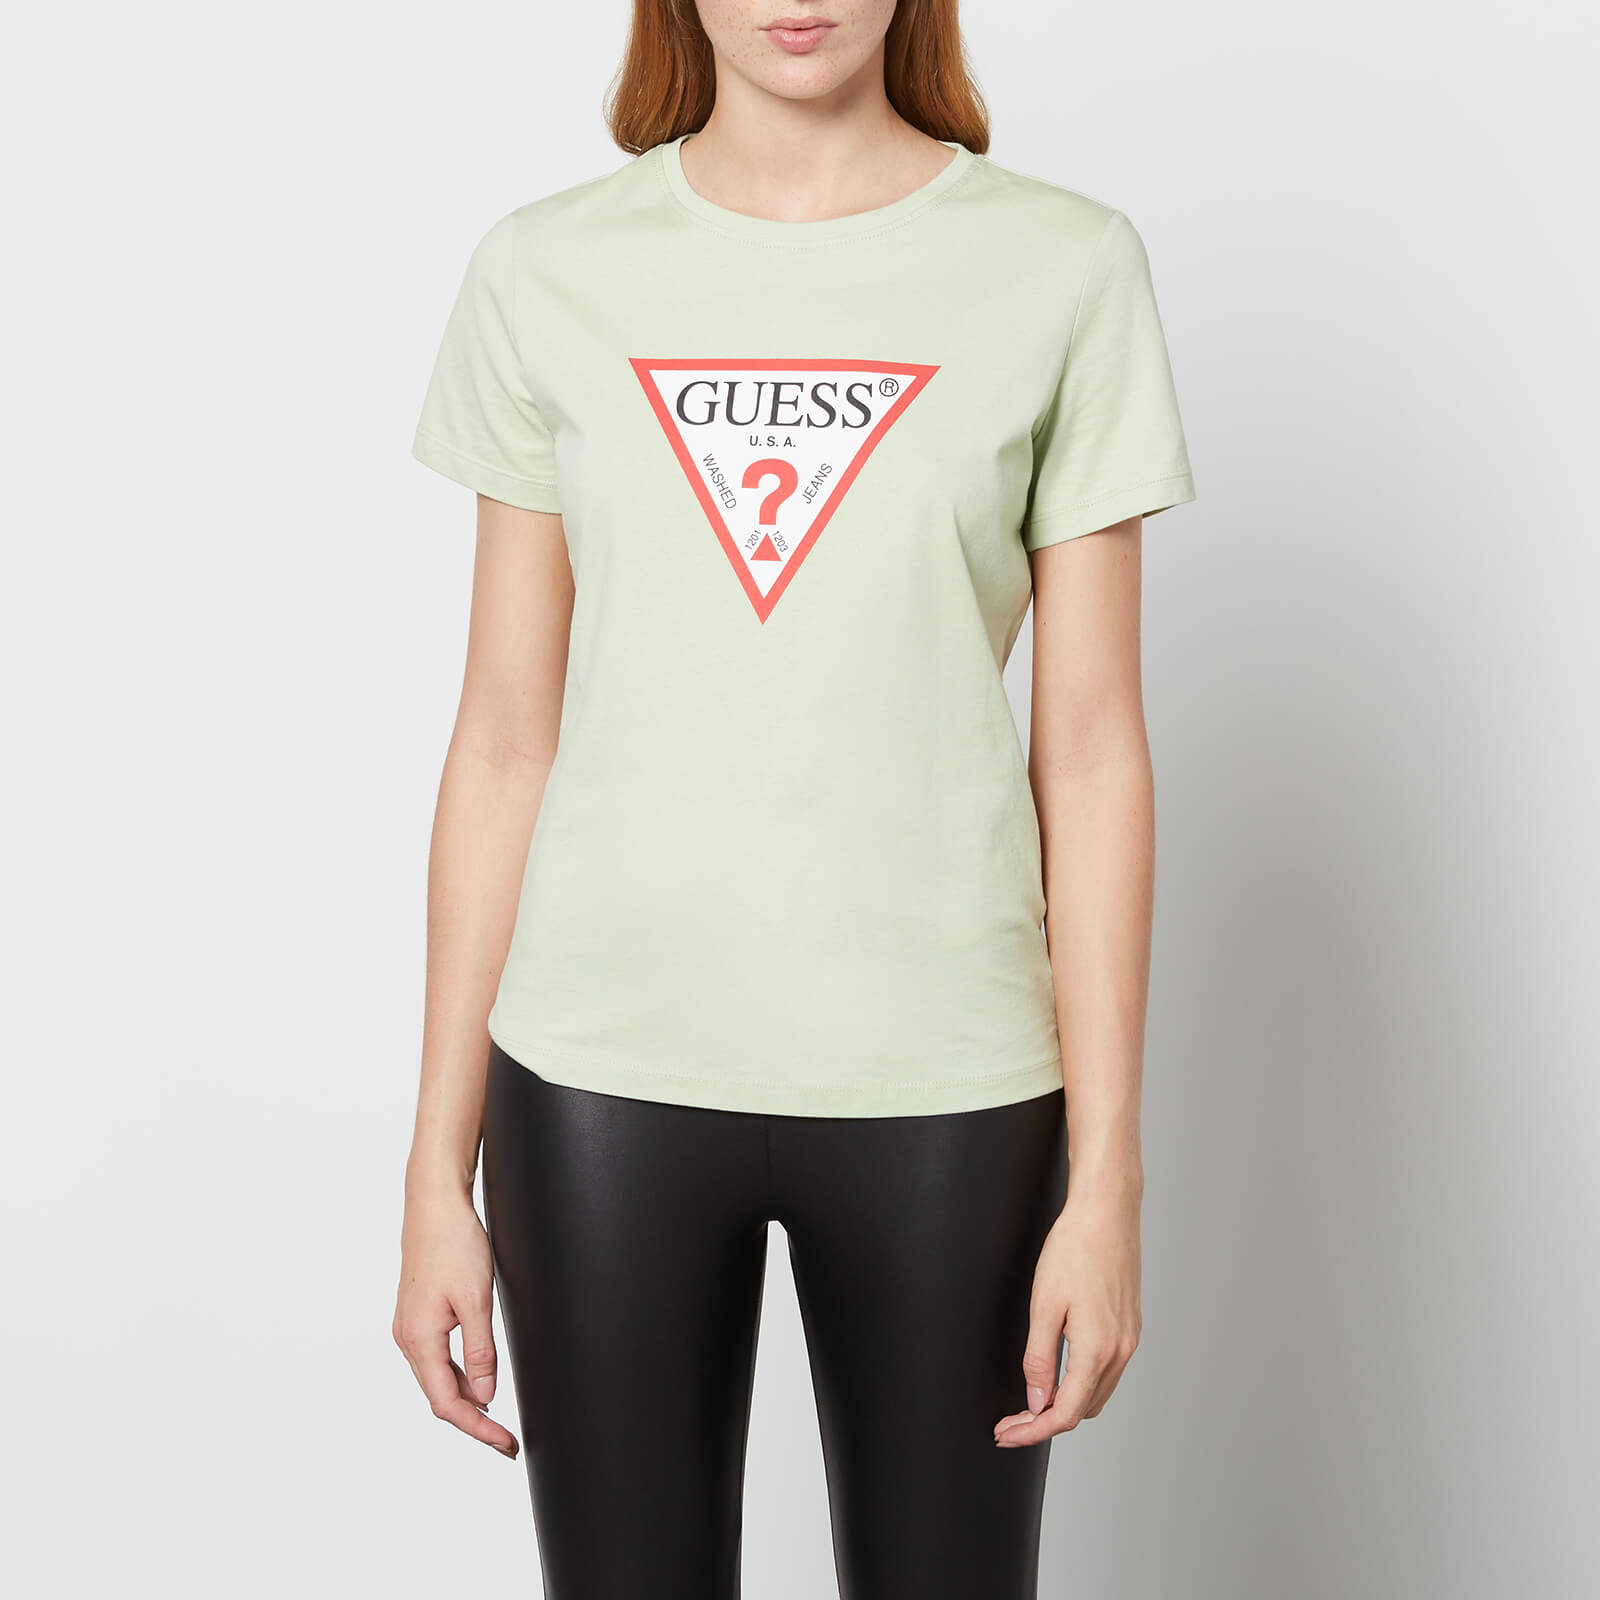 Guess Women's Ss Cn Original T-Shirt - Lost in Thyme